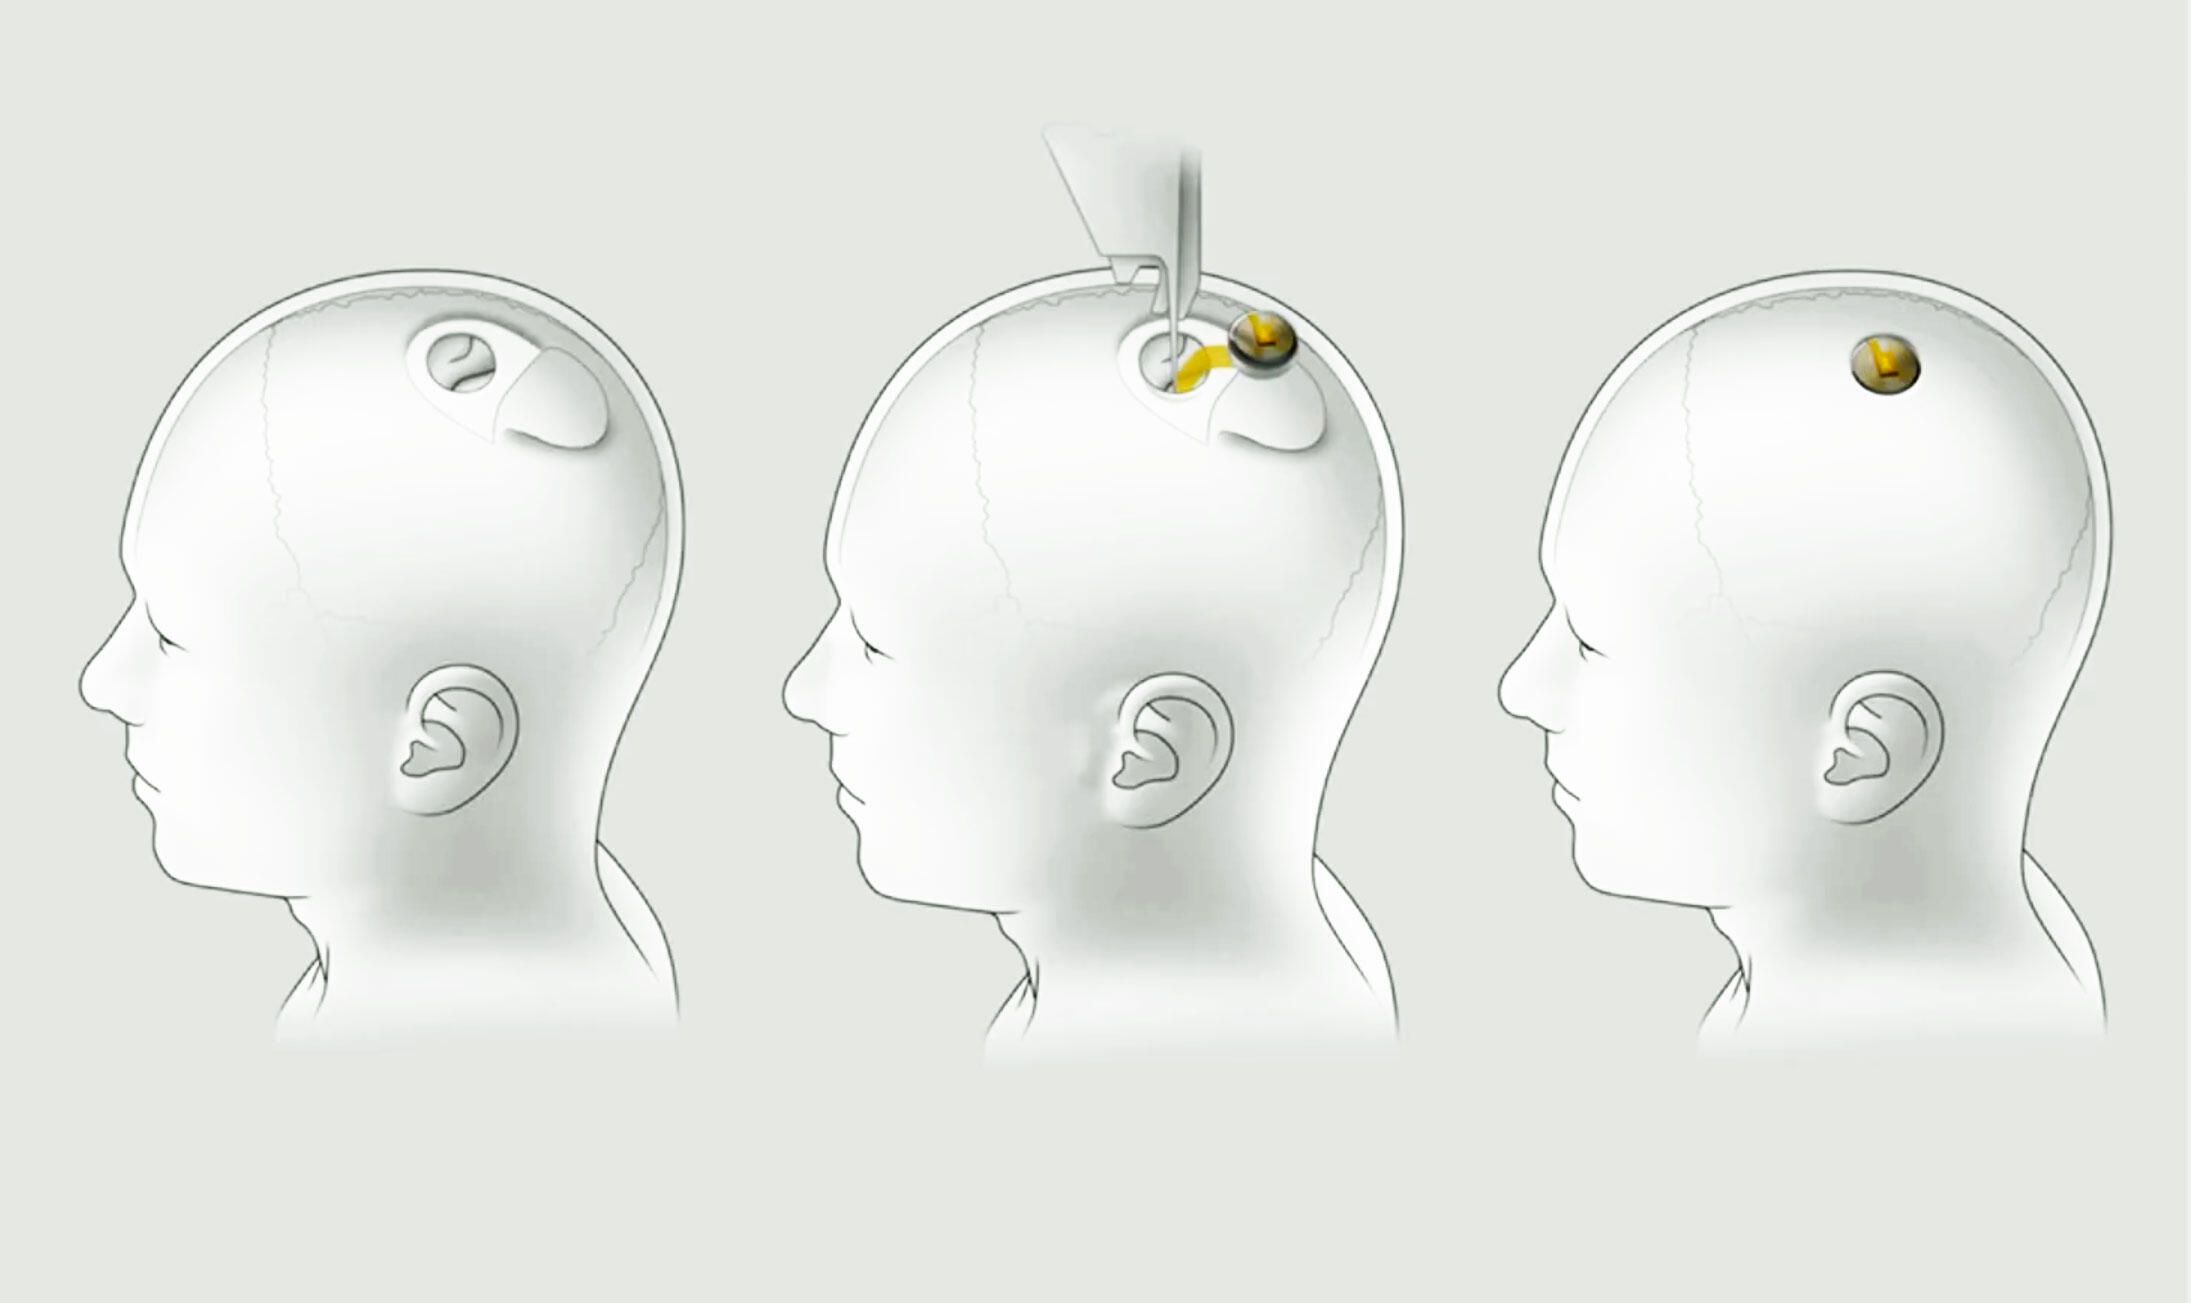 The device was developed by Neuralink , a company owned by Musk himself, which is creating the technologies needed to develop a brain-computer interfa